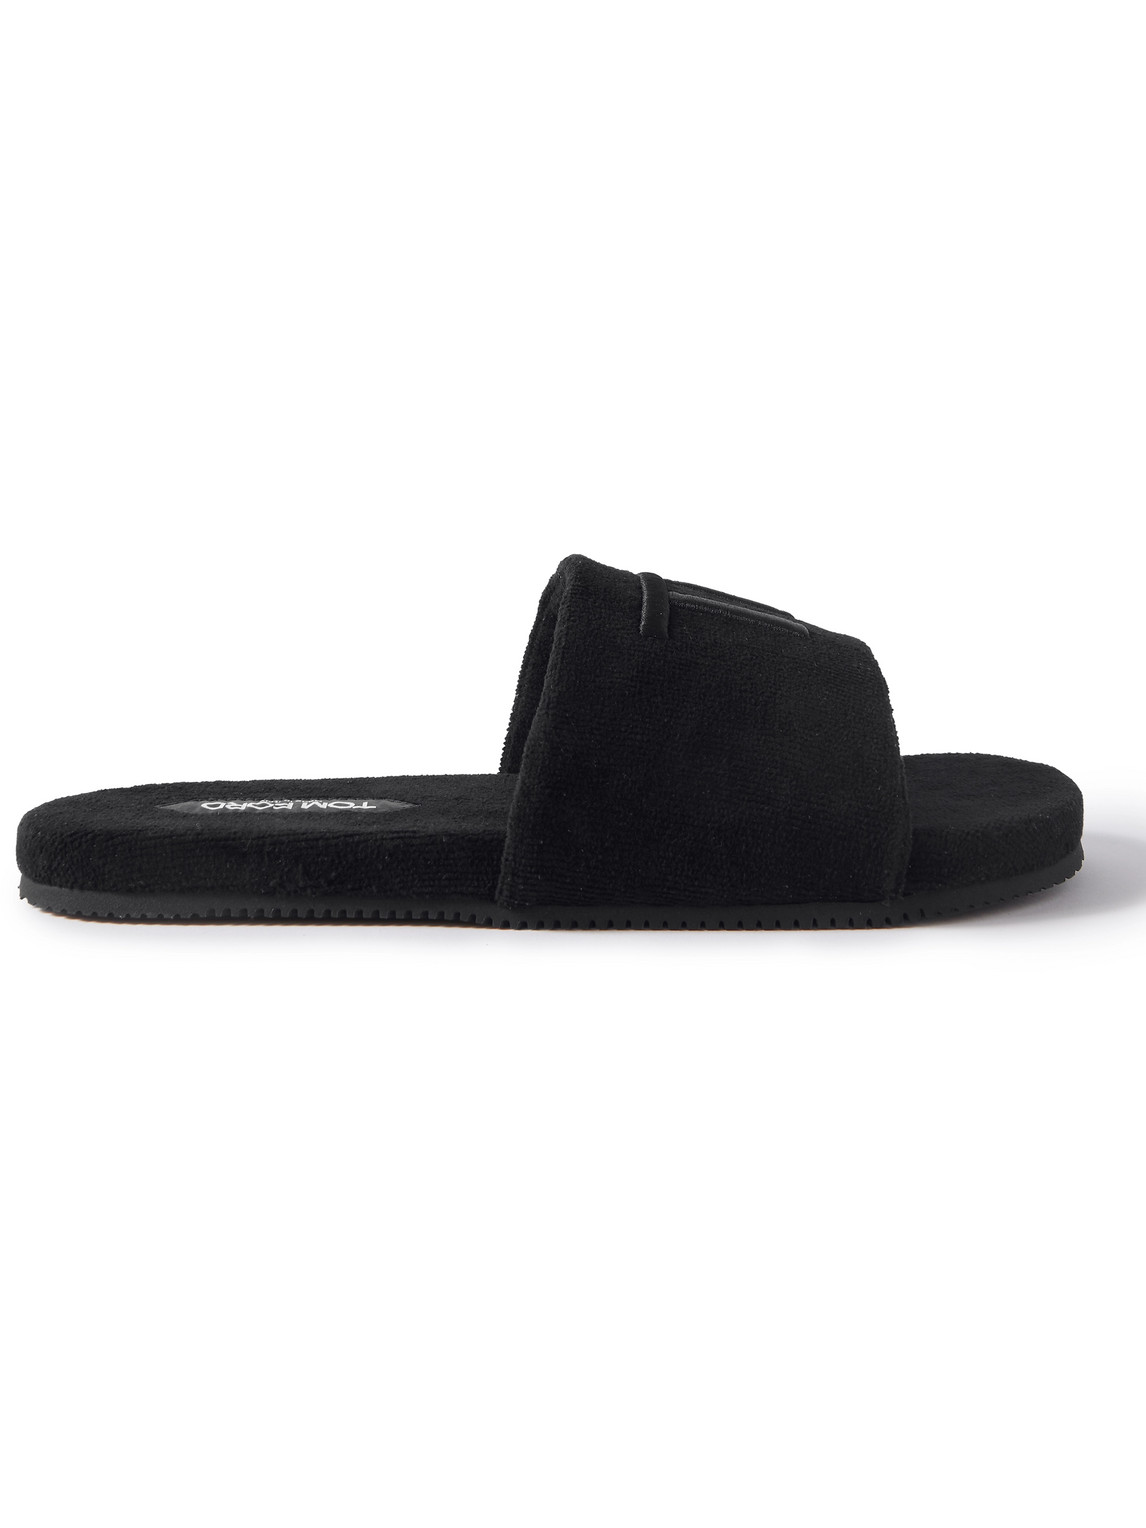 TOM FORD - Wicklow Leather And Suede Sandals - Men - Black - UK 8 for Men